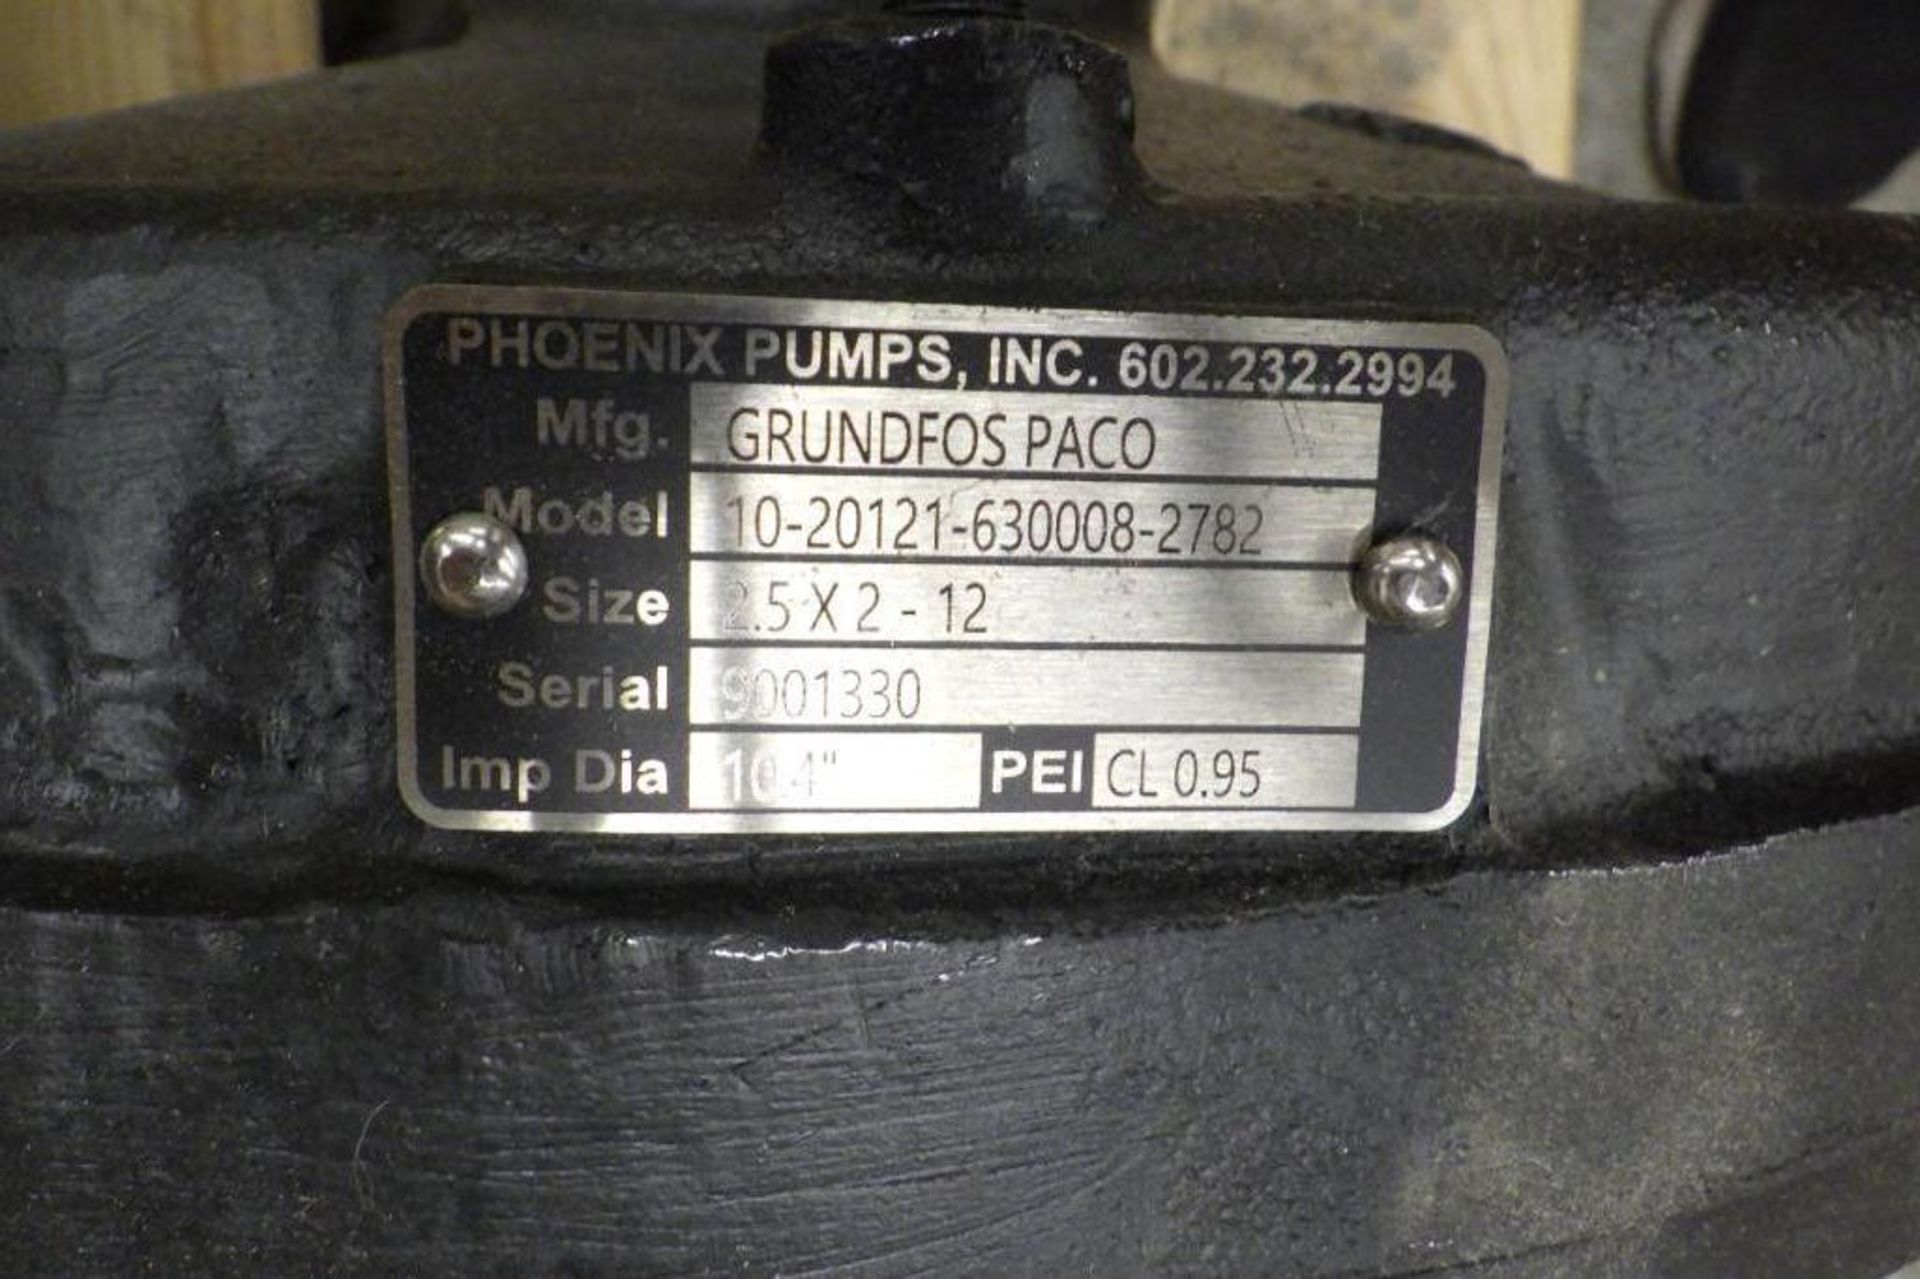 New Grundfos Paco centrifugal pumps - Image 4 of 11